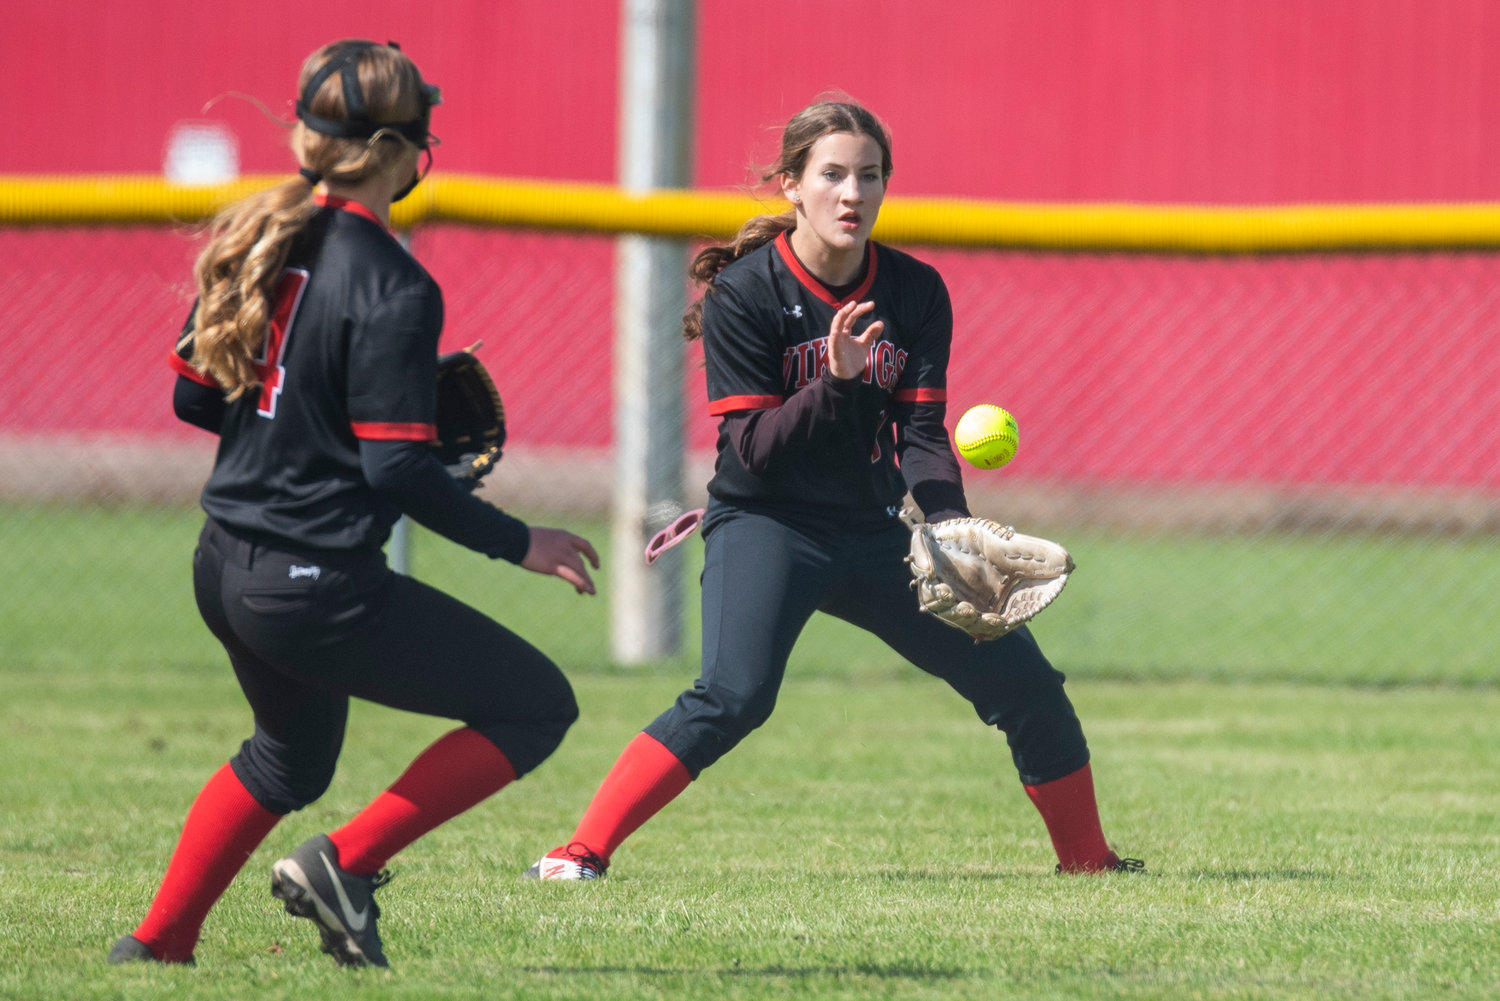 Mossyrock centerfielder Lois Stone, right, fields a Naselle base hit during a win over the Comets on May 9.